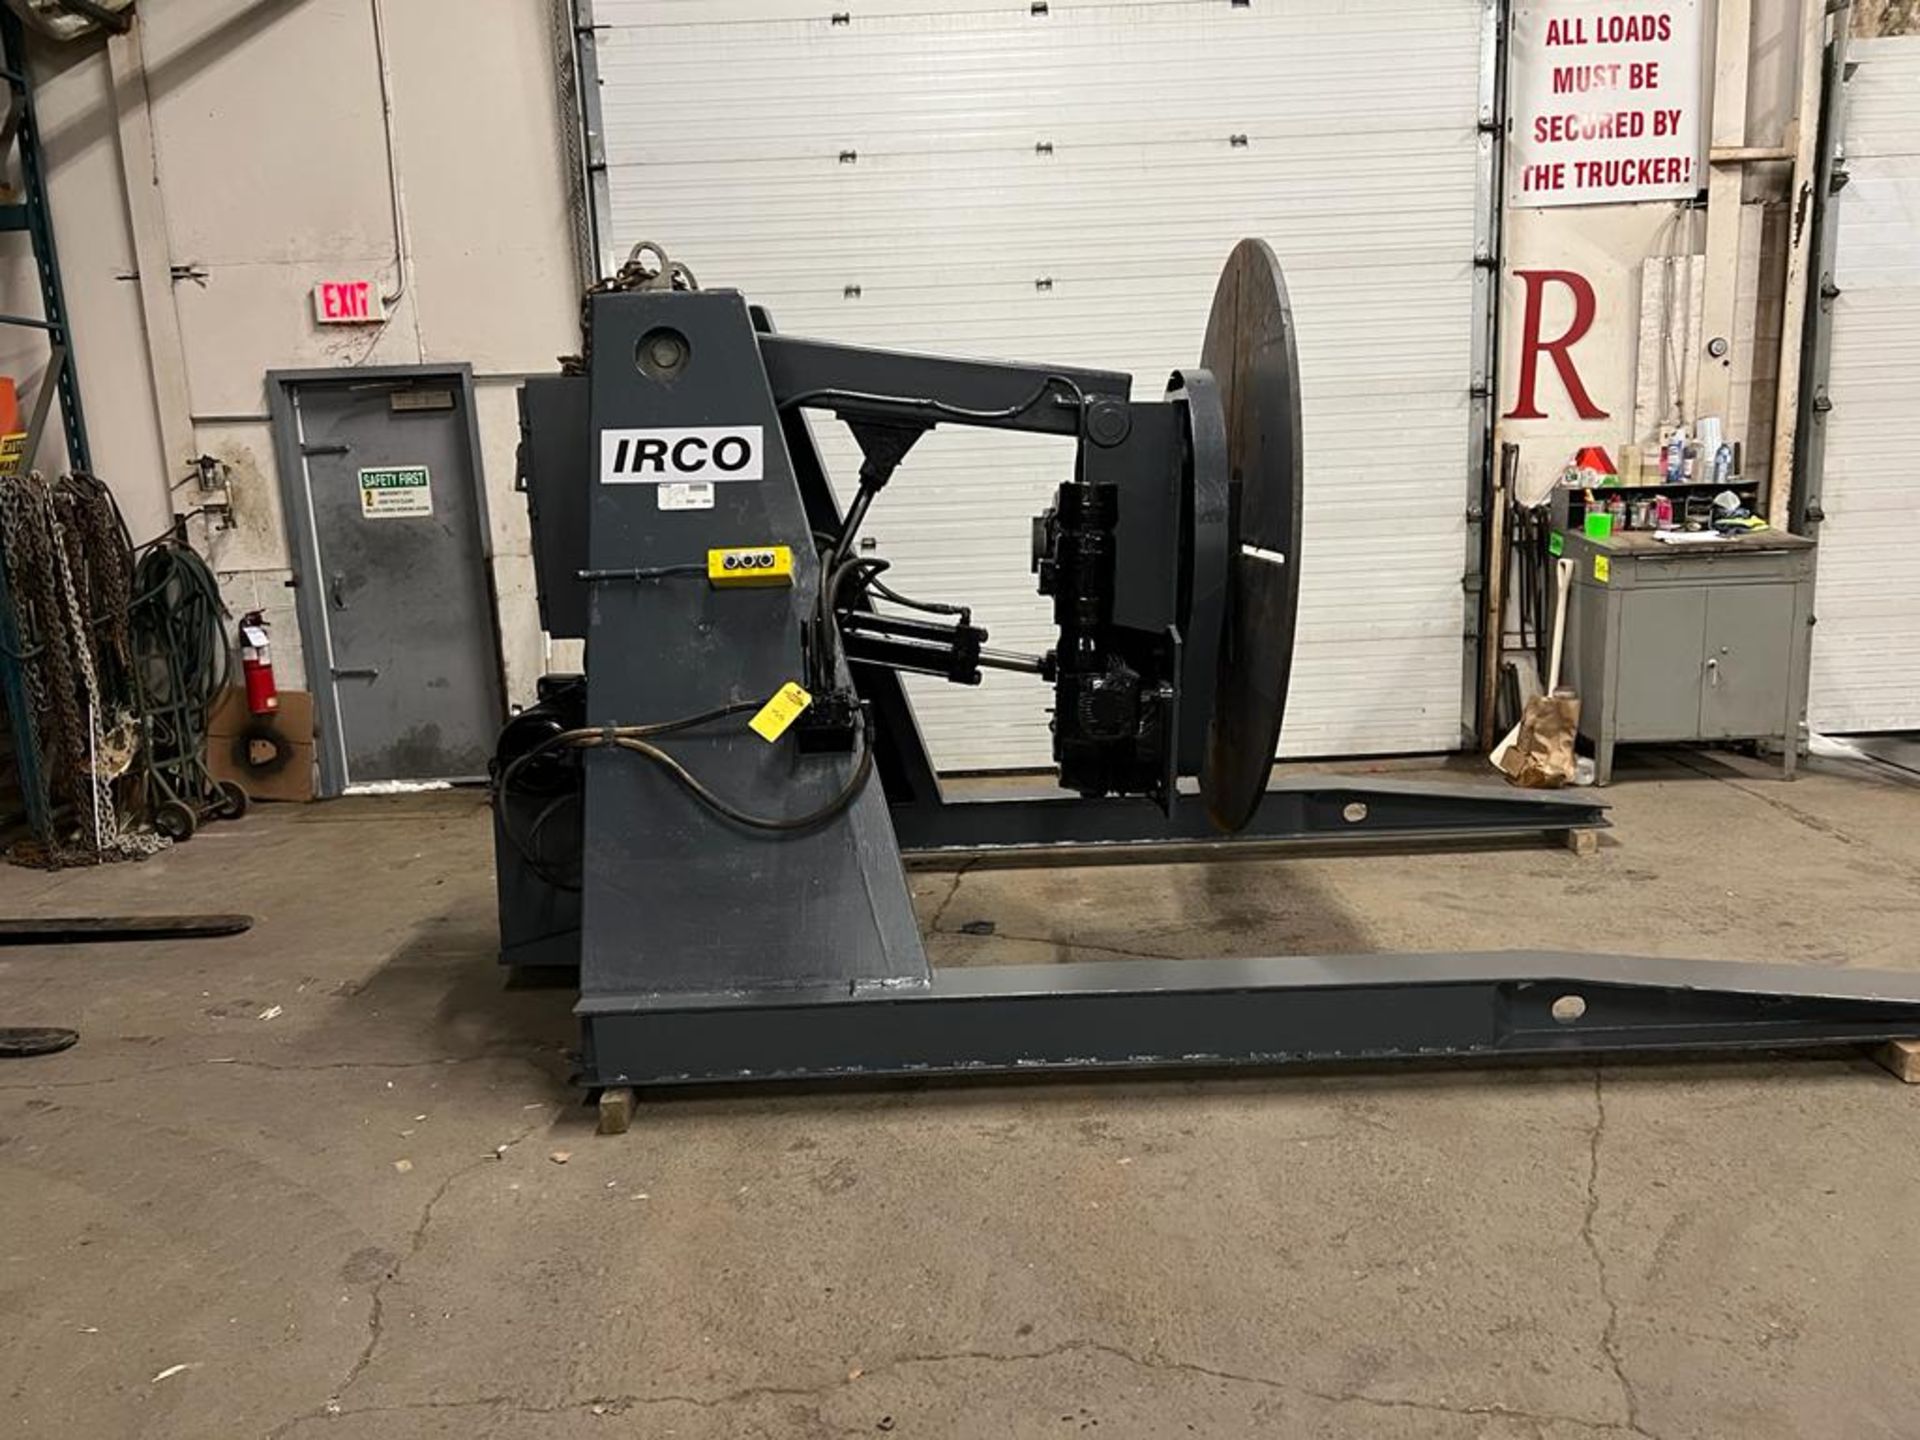 IRCO 16,000lbs Capacity Welding Positioner TILT and ROTATE model 6-16 with pendant controller - Image 3 of 5